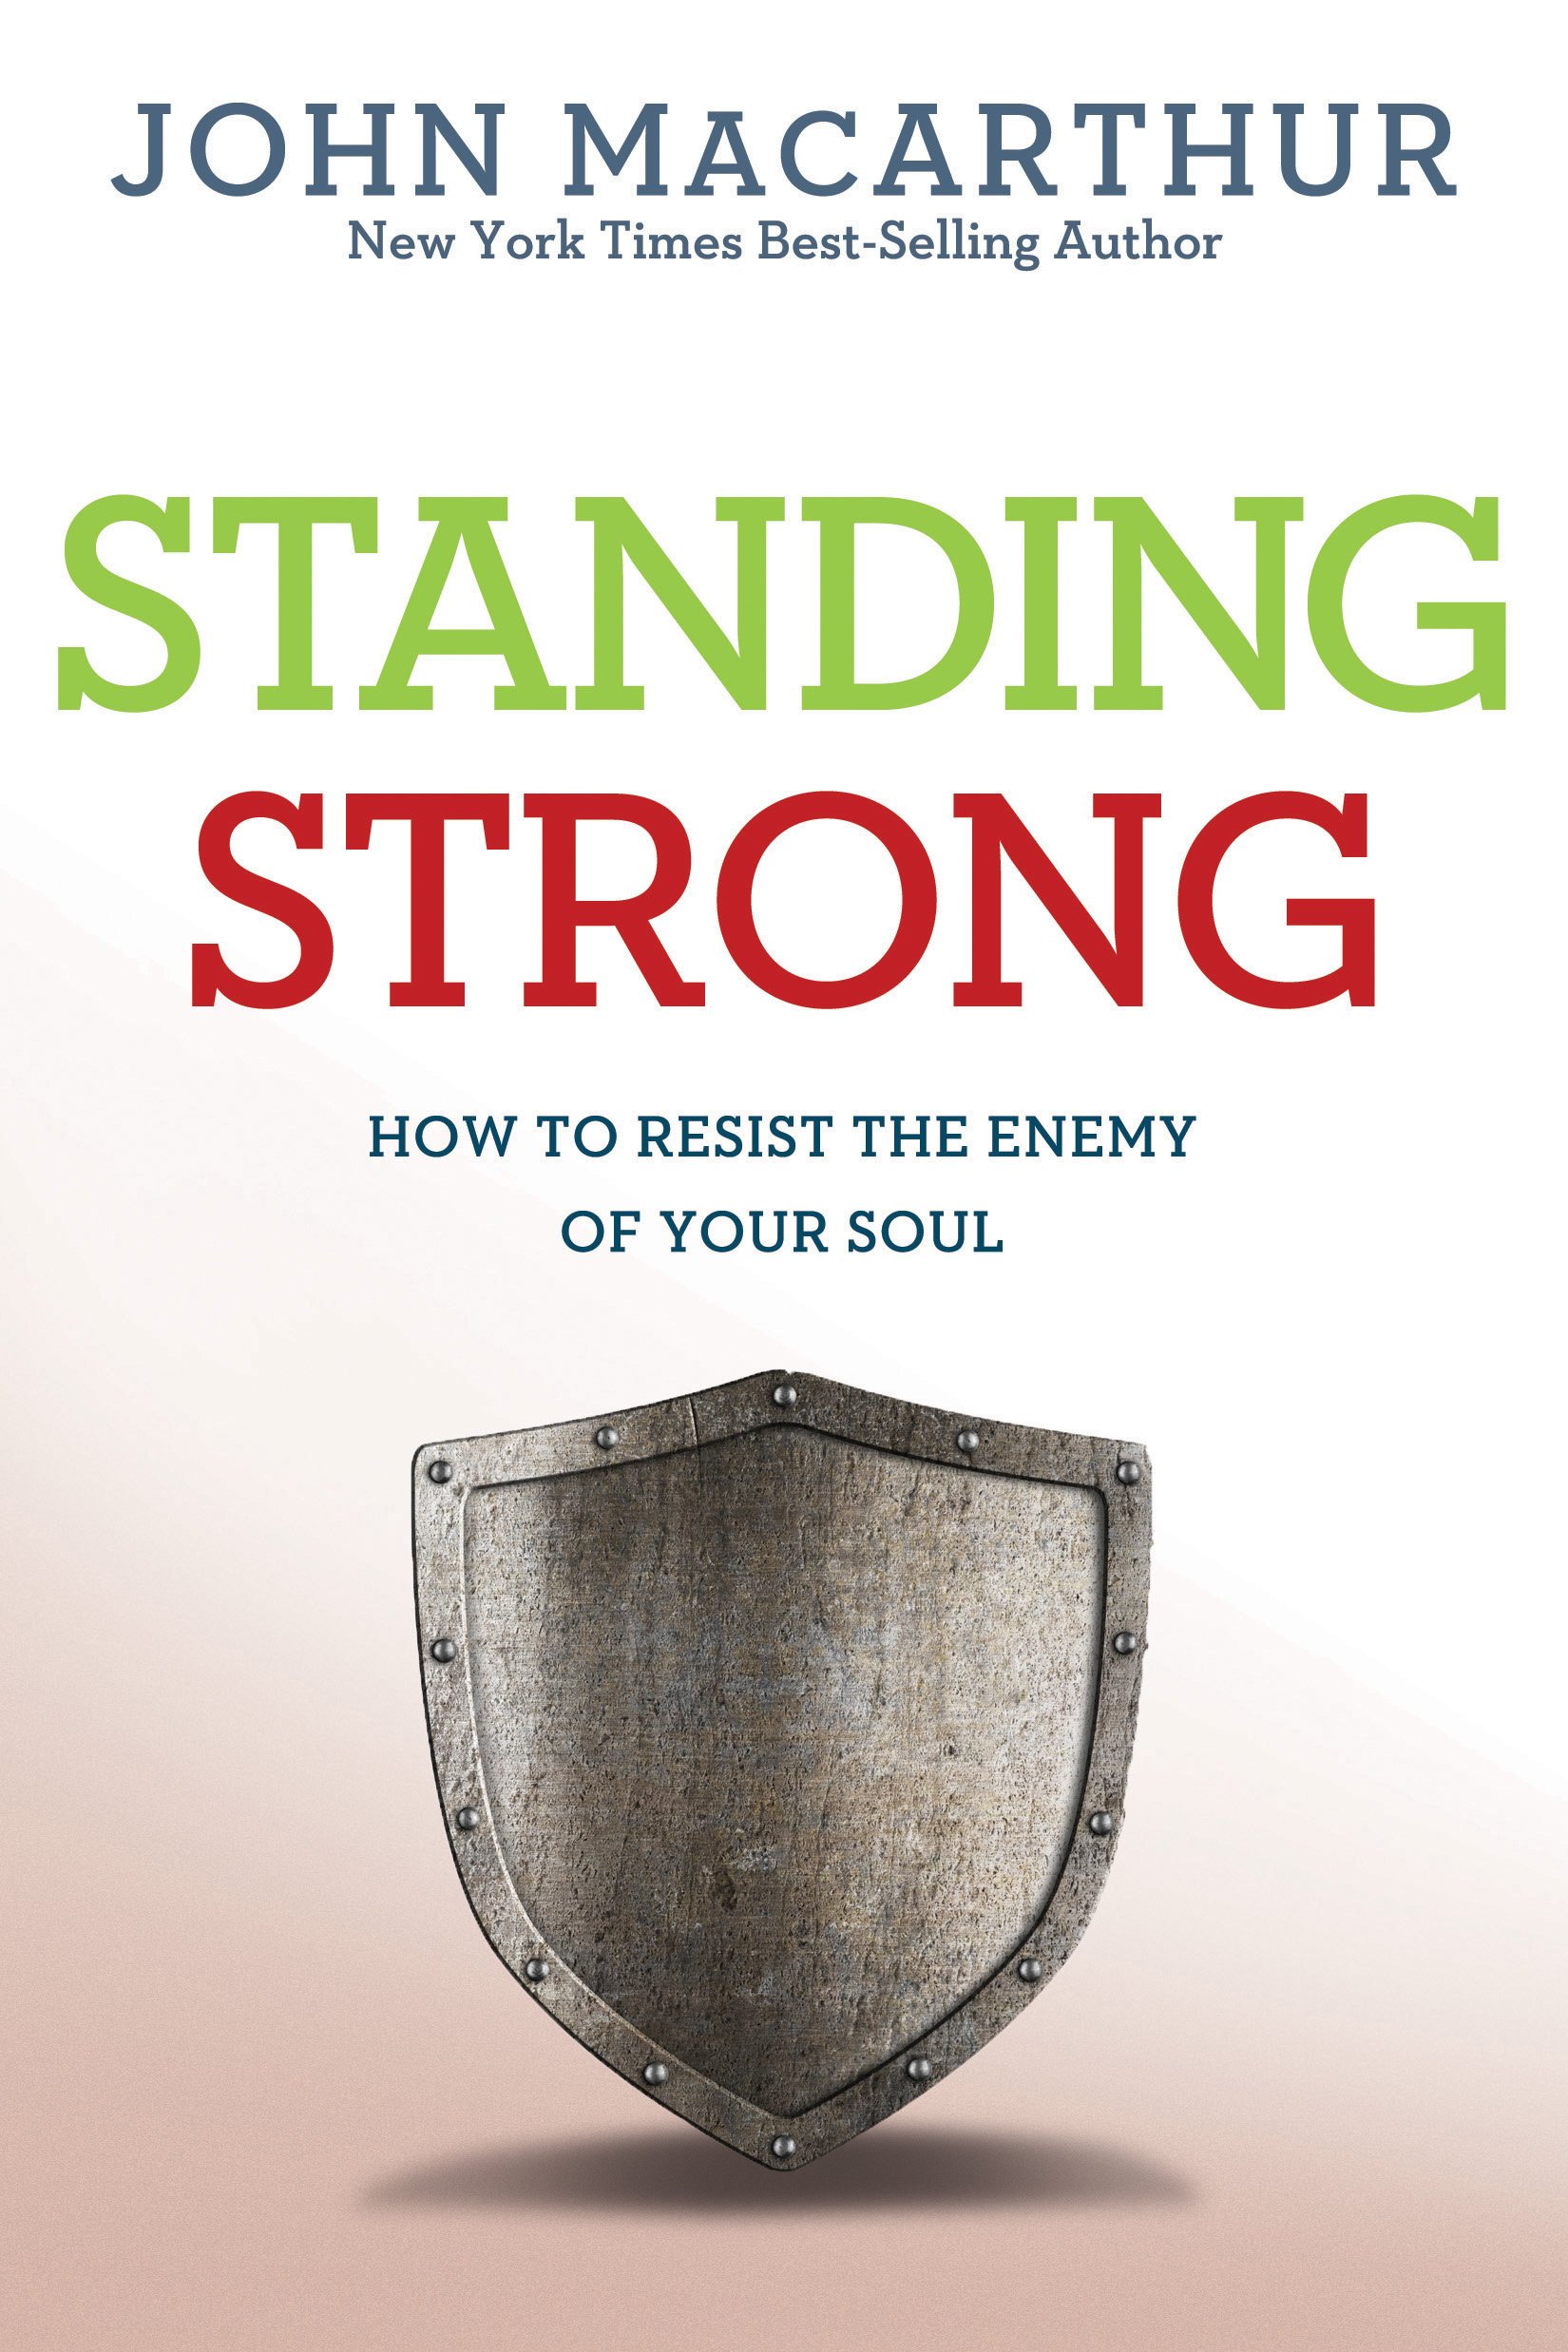 Get a FREE Copy of Standing Strong by John MacArthur!